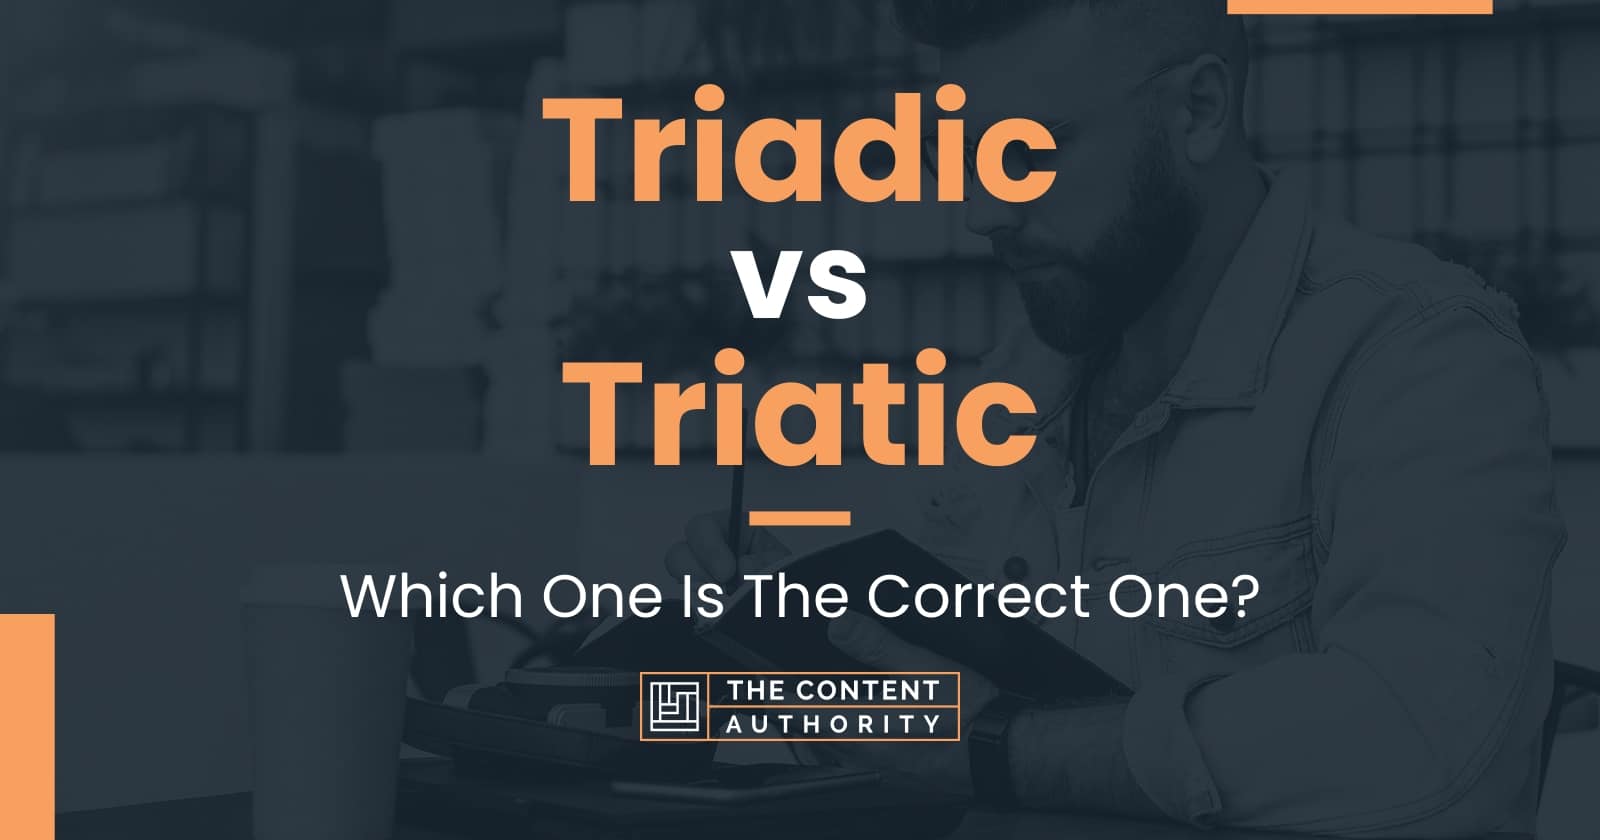 Triadic vs Triatic: Which One Is The Correct One?